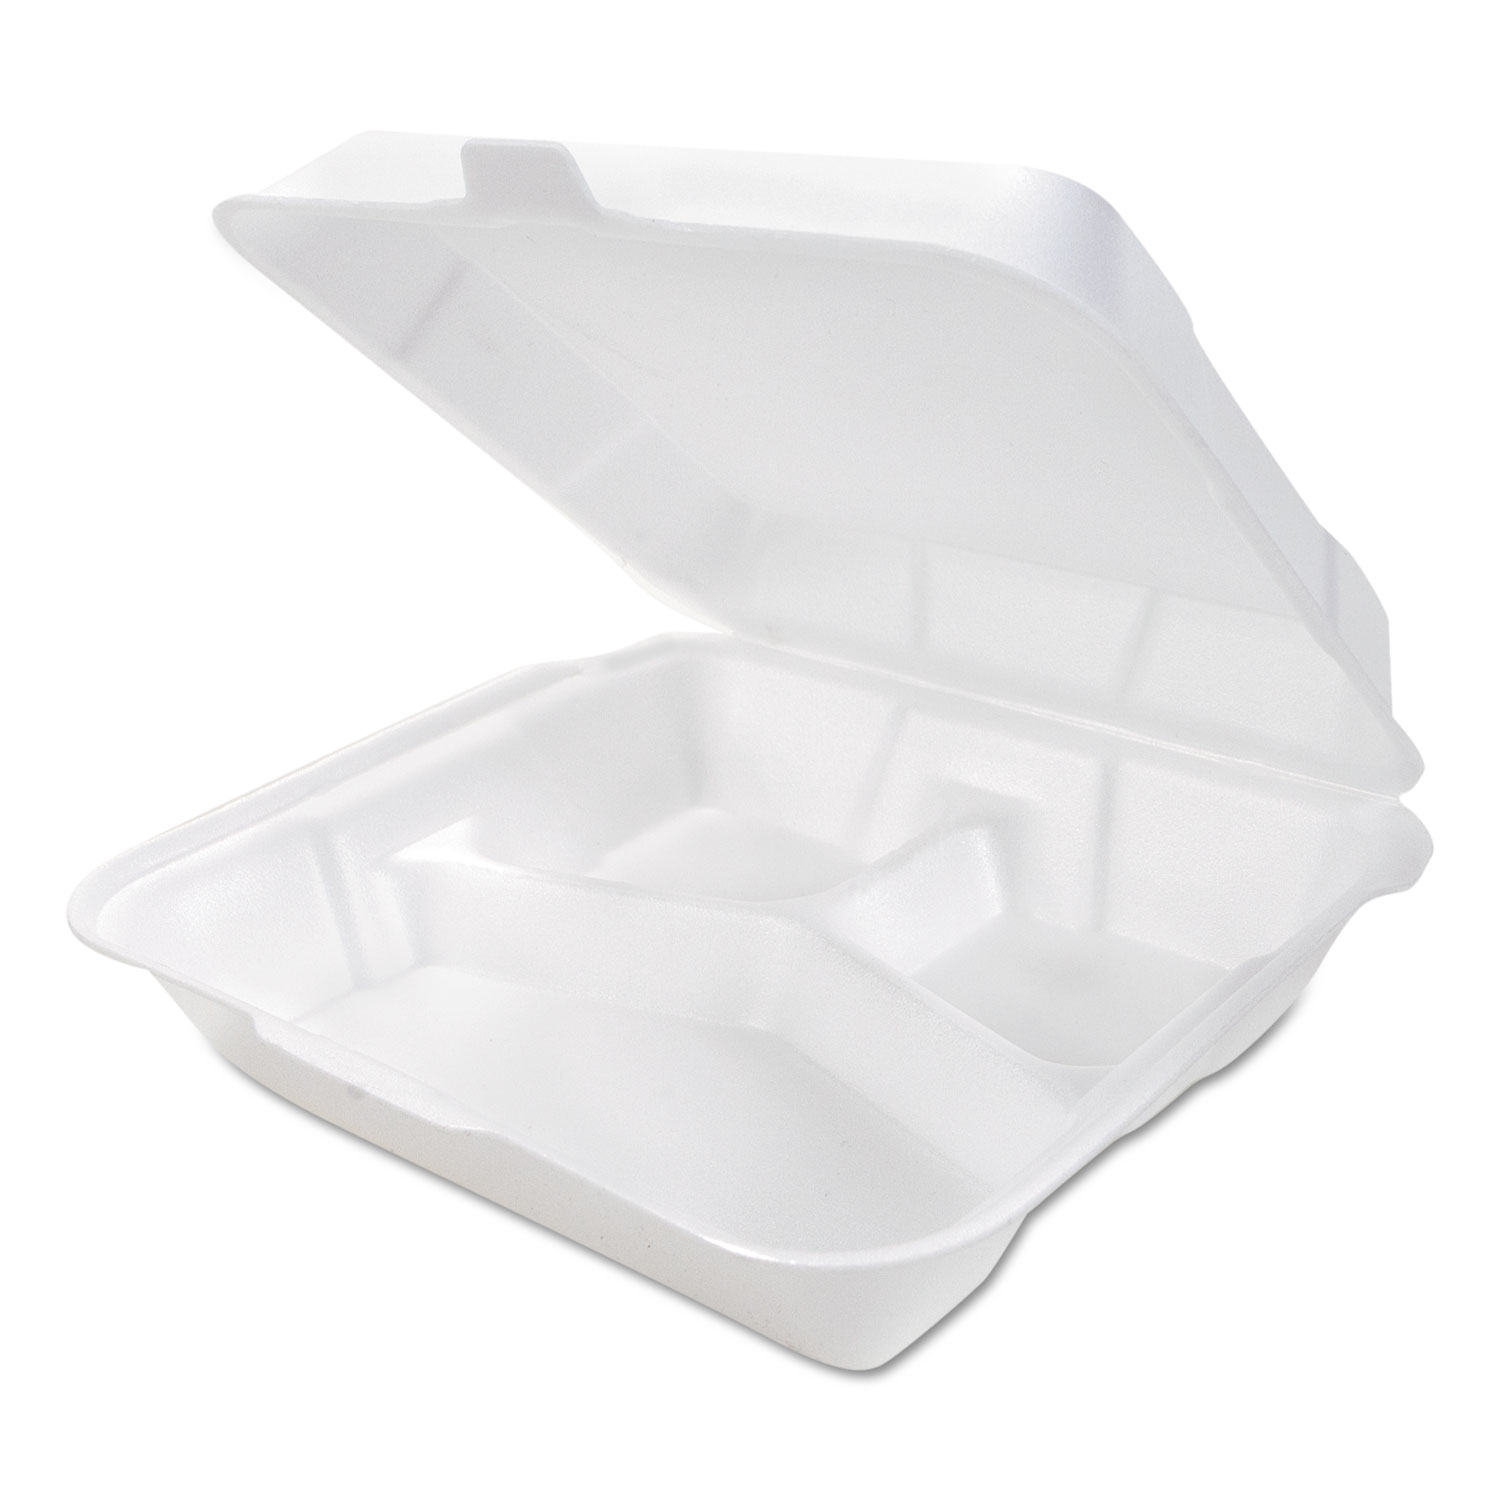 Snap-it Hinged Carryout Container, Foam, 3-Compartment, Medium, White, 200/CT